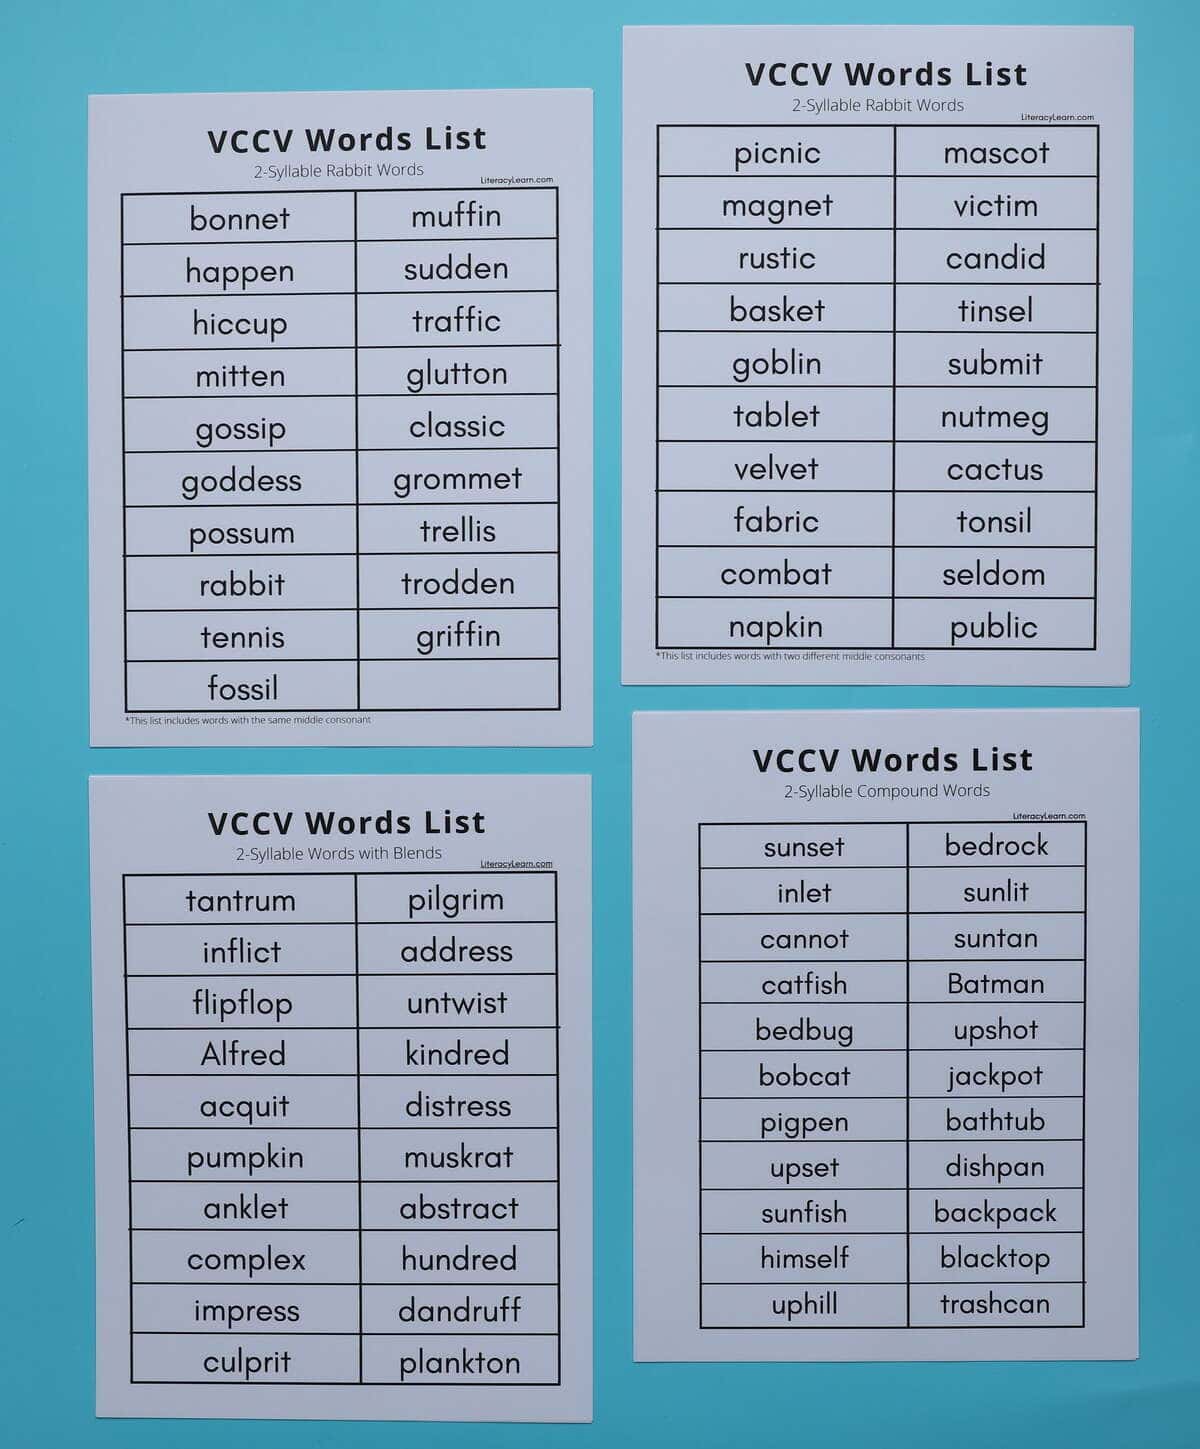 Four printed VCCV (Rabbit) Words lists on a blue background.